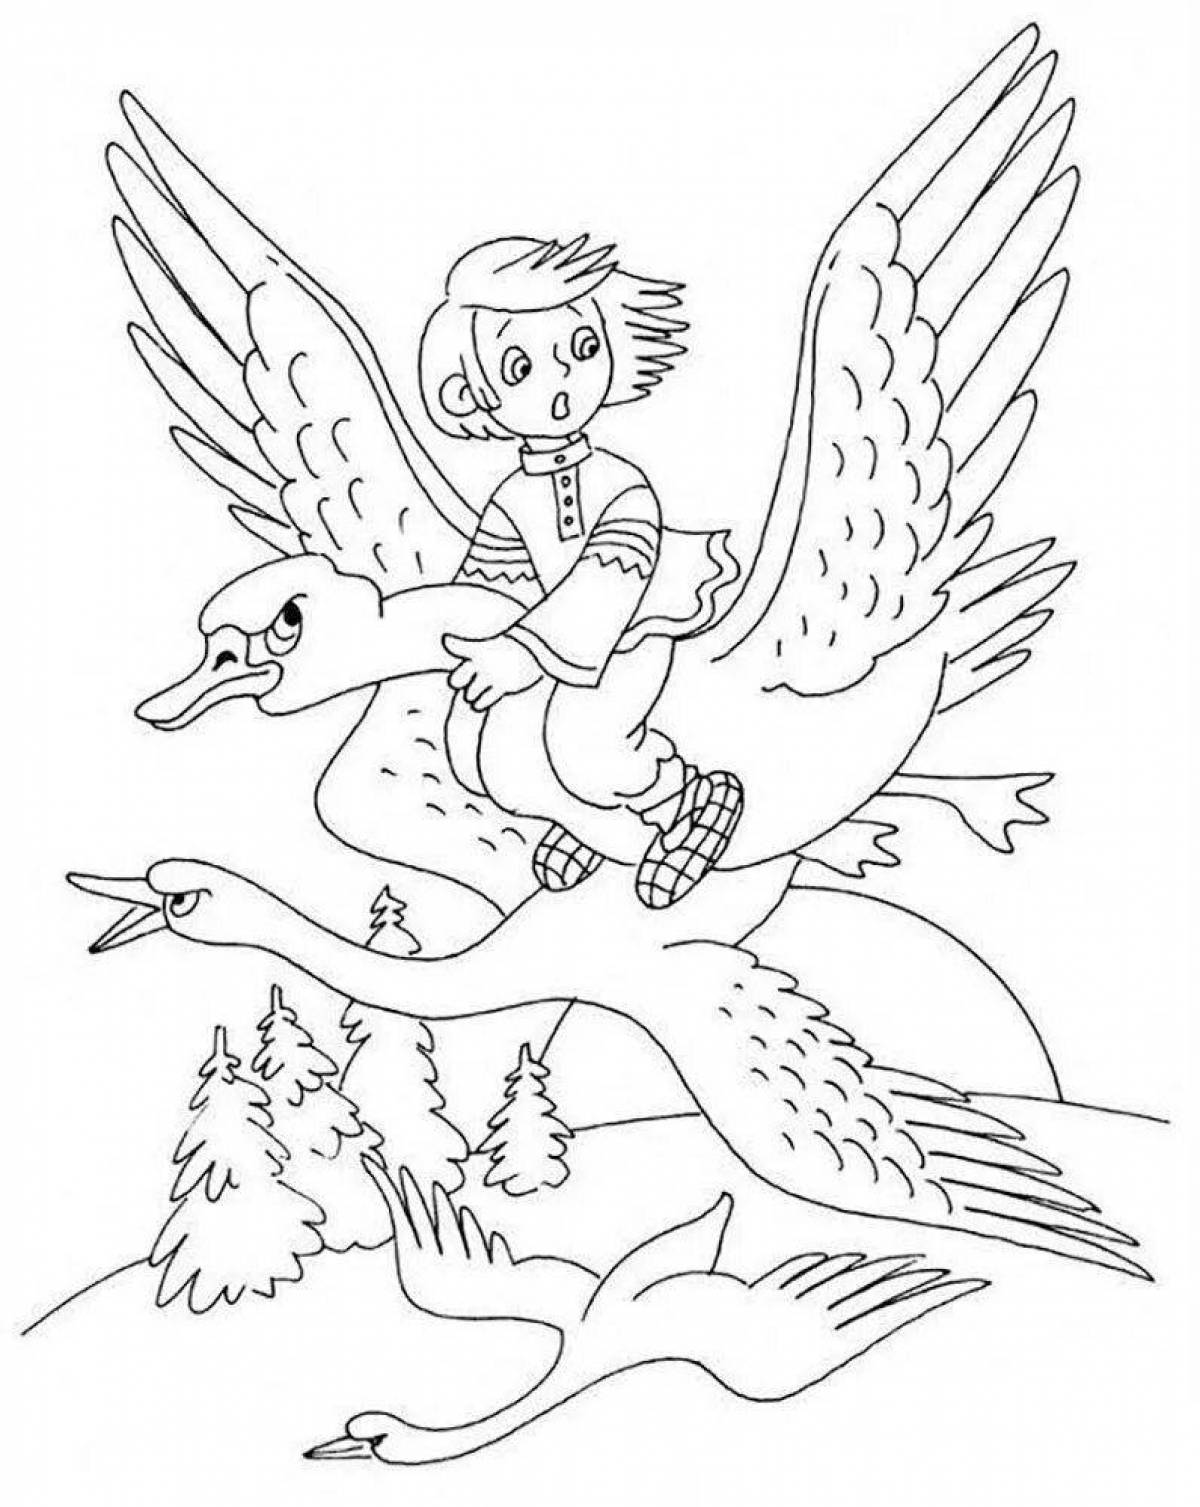 Swan geese coloring book for kids